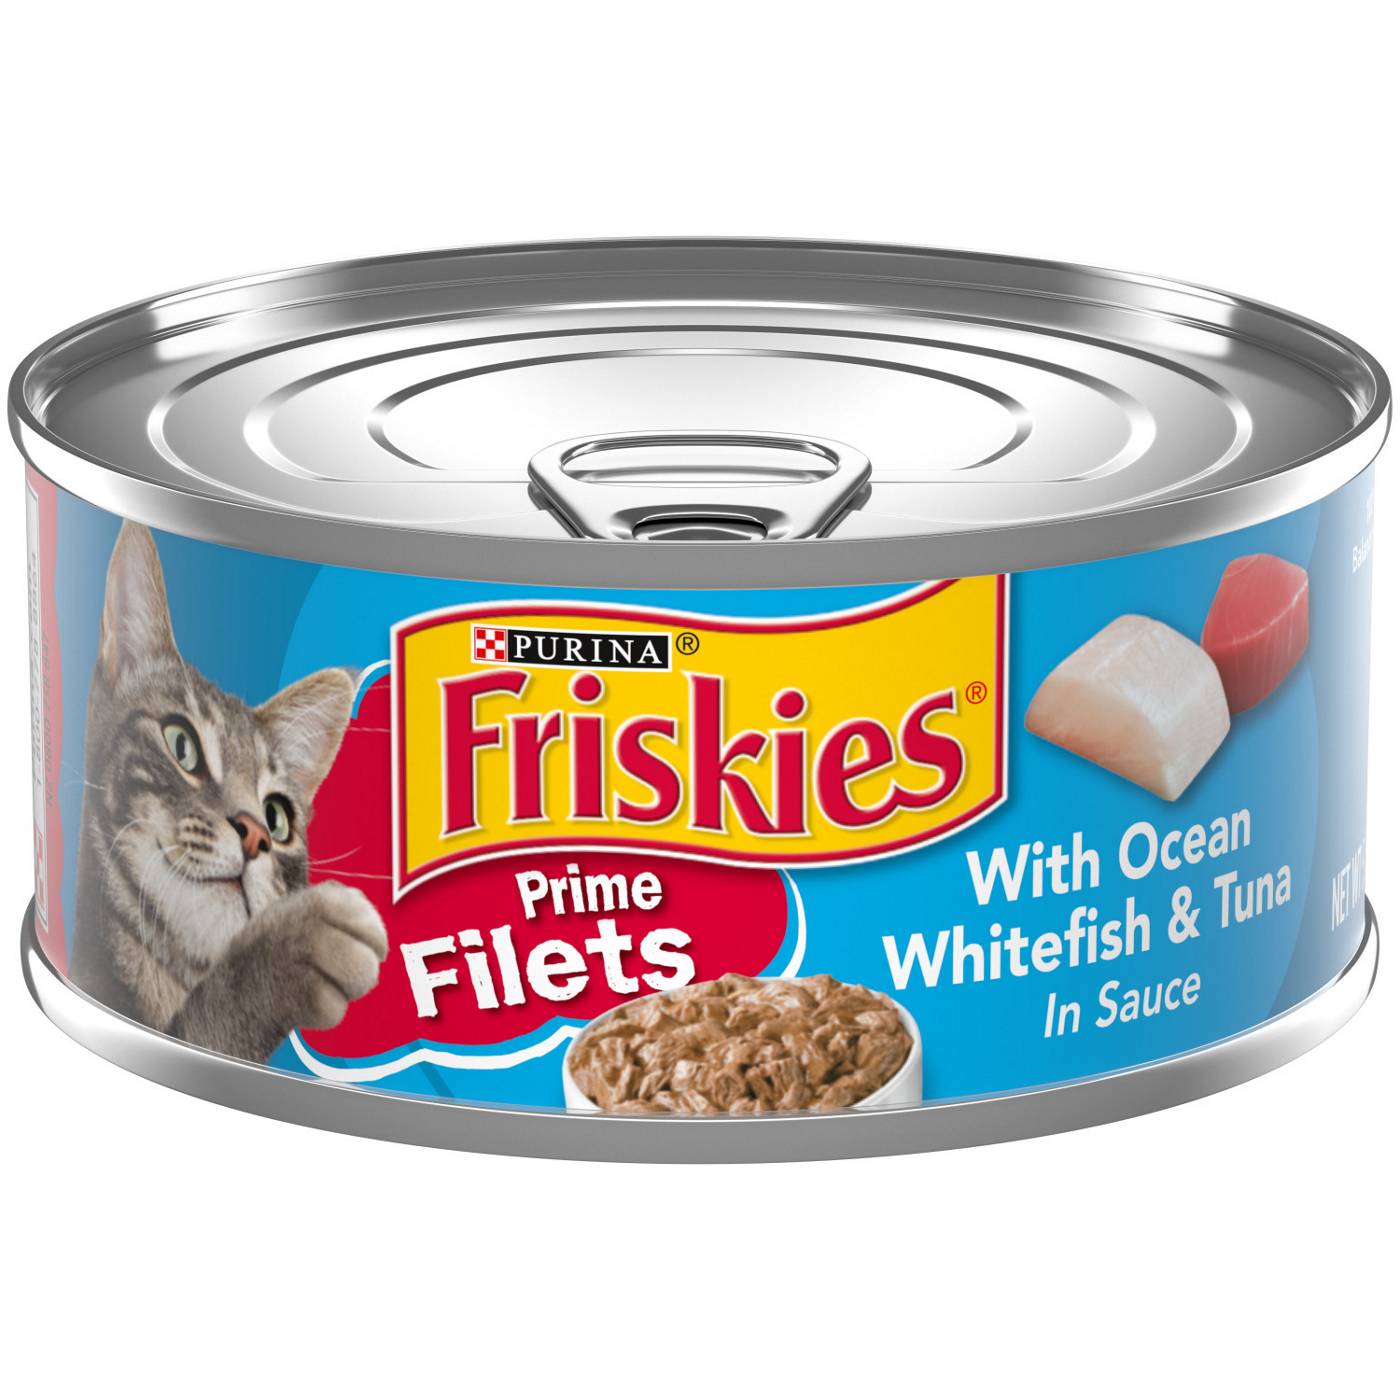 Friskies Purina Friskies Wet Cat Food, Prime Filets With Ocean Whitefish & Tuna in Sauce; image 1 of 6